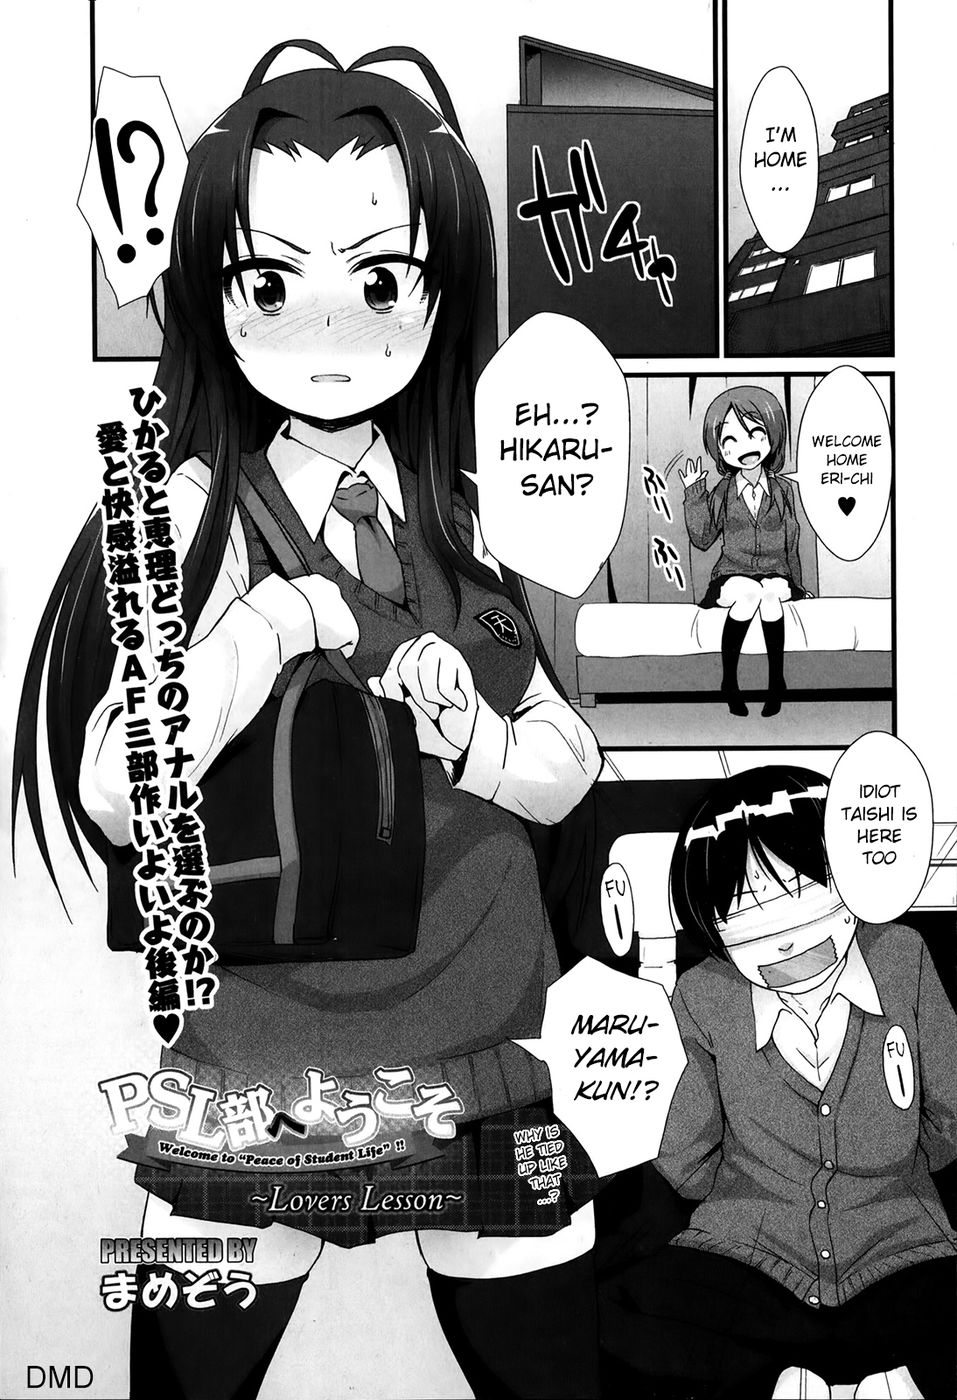 Hentai Manga Comic-Welcome to the PSL Club-Chapter 3-Lover's Lesson-1